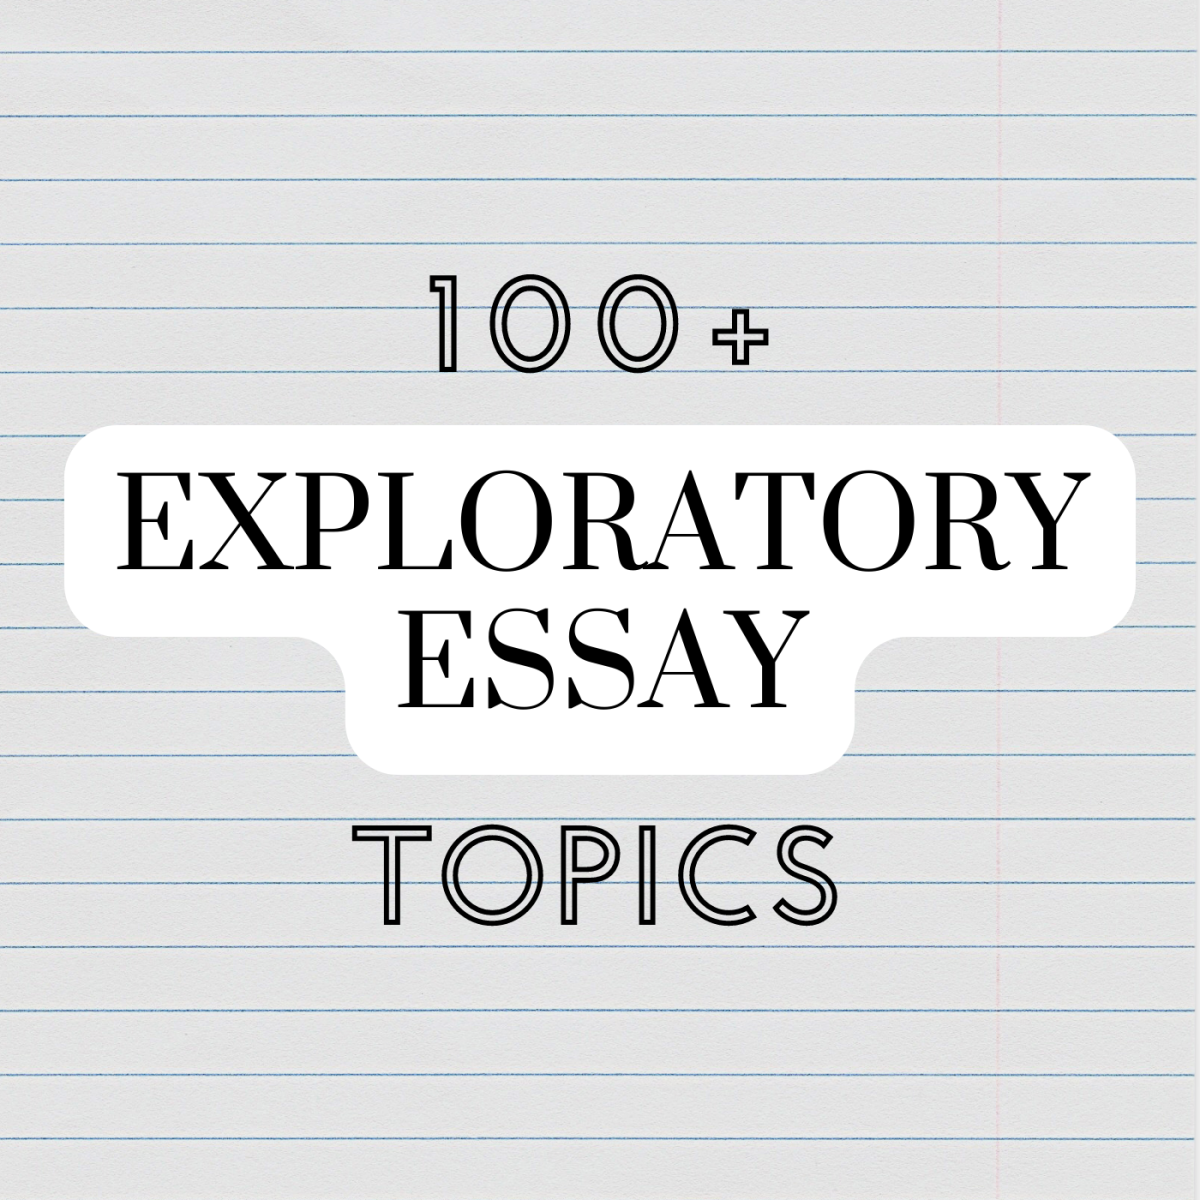 Over 100 essay topics to choose from!